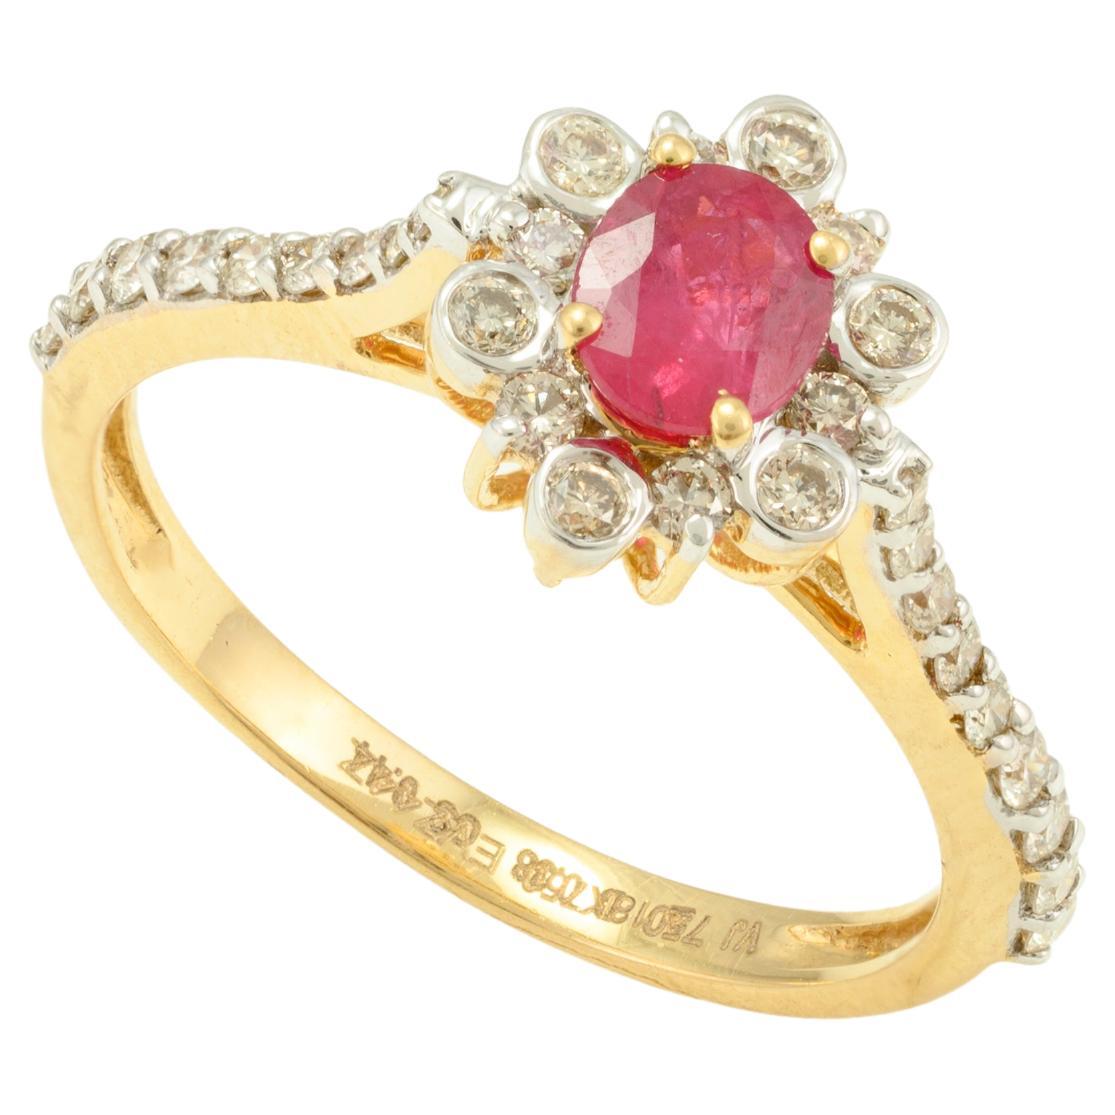 For Sale:  Contemporary Diamond and Natural Ruby Gemstone Ring in 18k Solid Yellow Gold